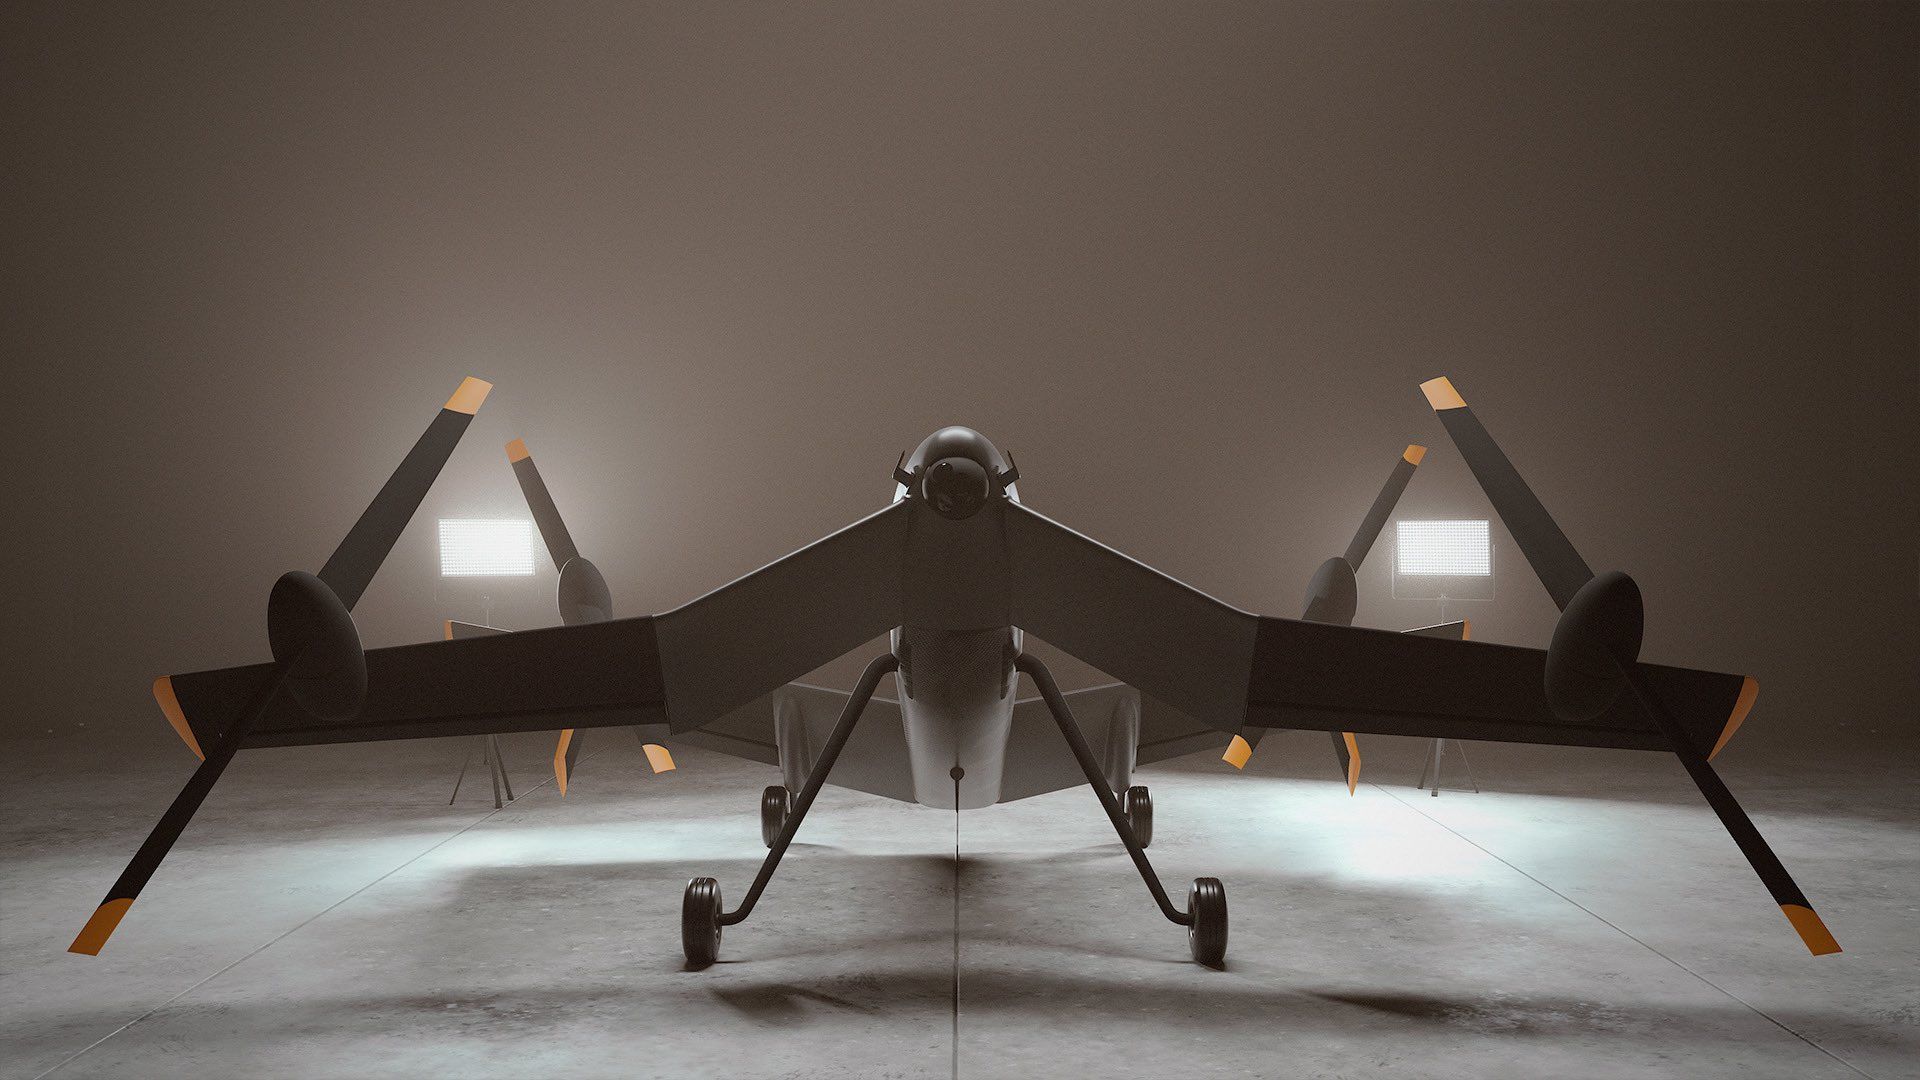 BAE Unveils Unmanned Aircraft Project Made in Australia